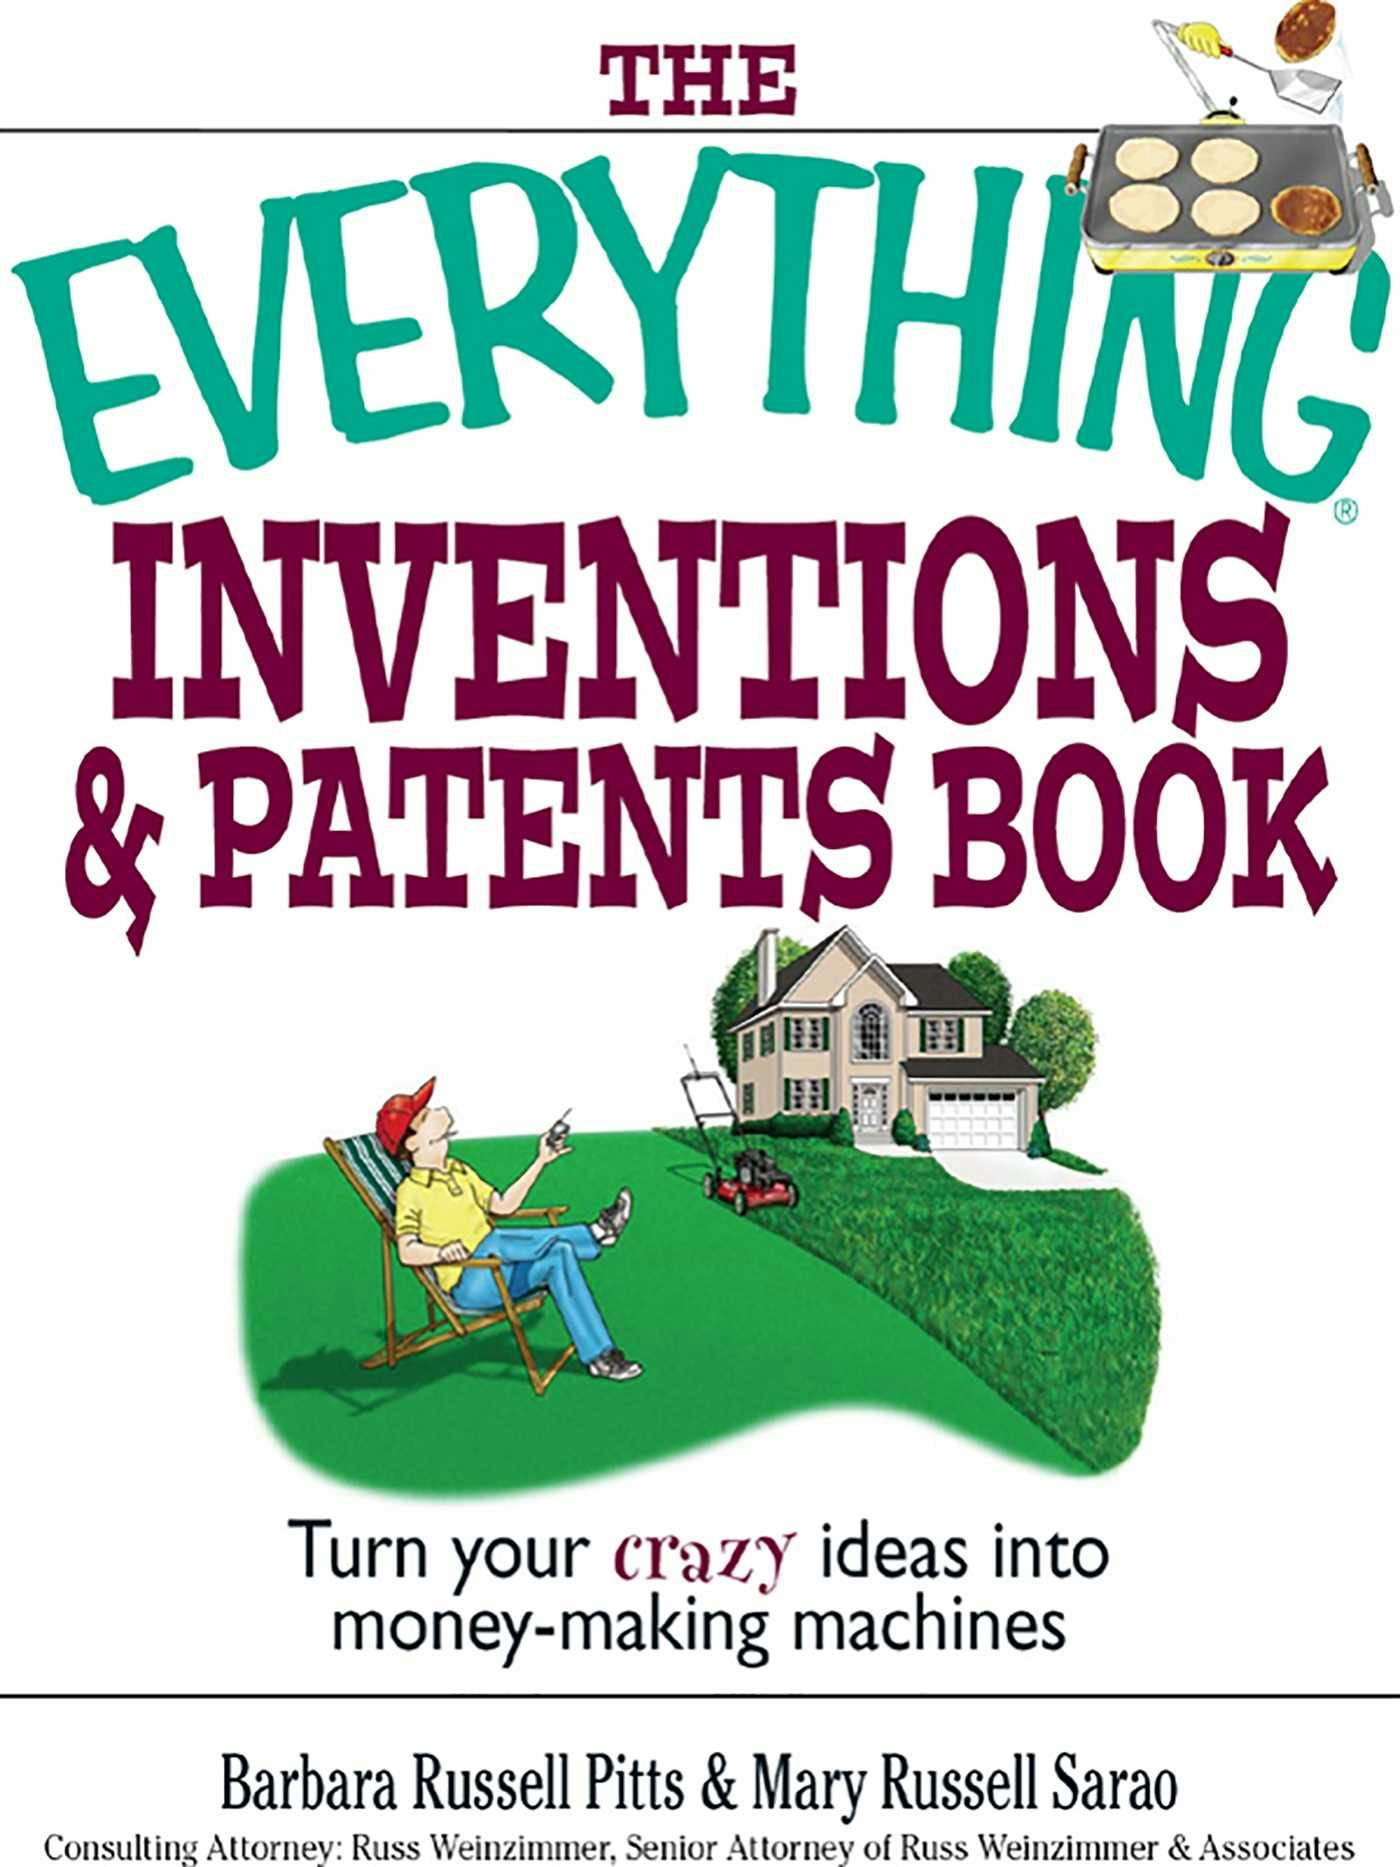 The Everything Inventions And Patents Book: Turn Your Crazy Ideas into Money-making Machines! - Mary Russell Sarao, Barbara Russell Pitts